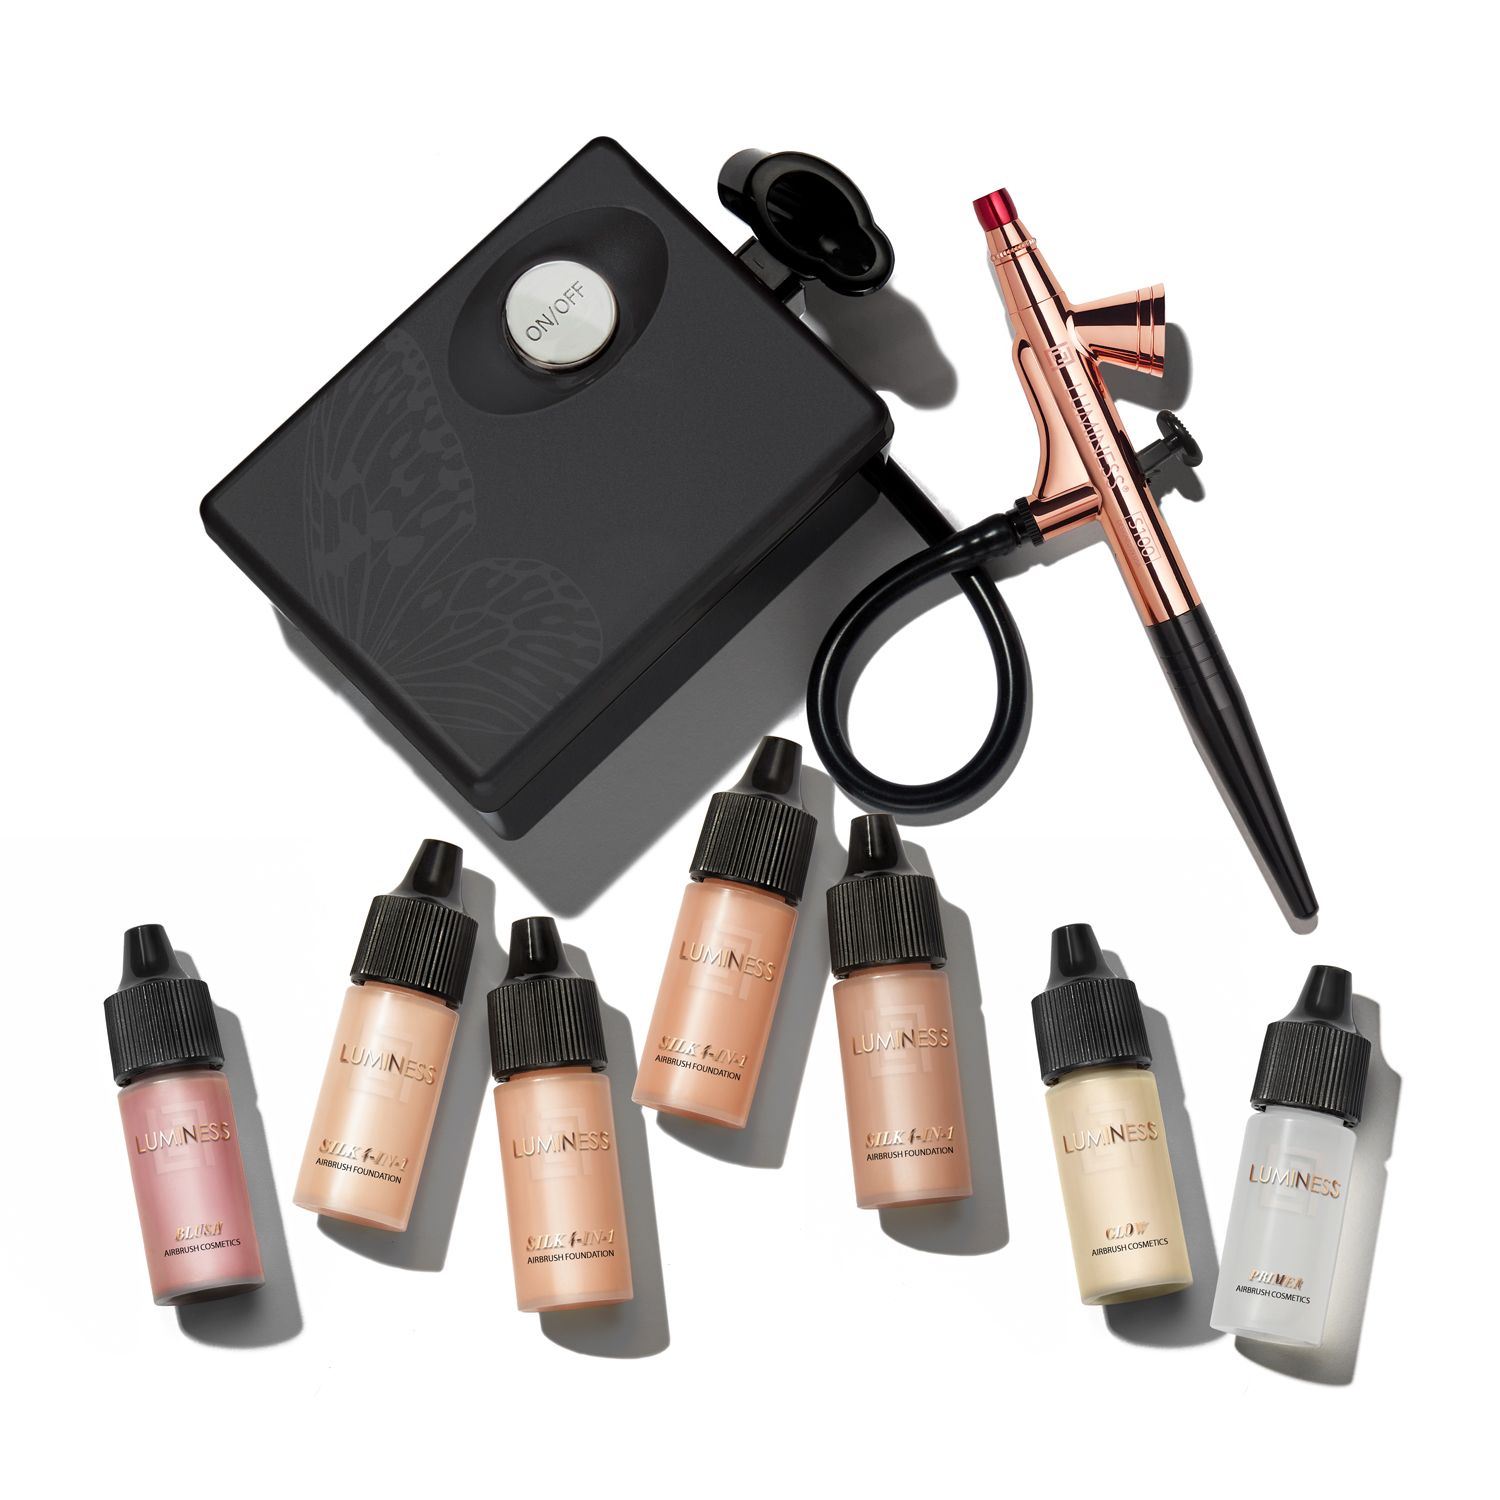 Luminess Air Basic Airbrush System with 7-Piece Silk 4-in-1 Airbrush Foundation & Cosmetic Starter Kit Medium